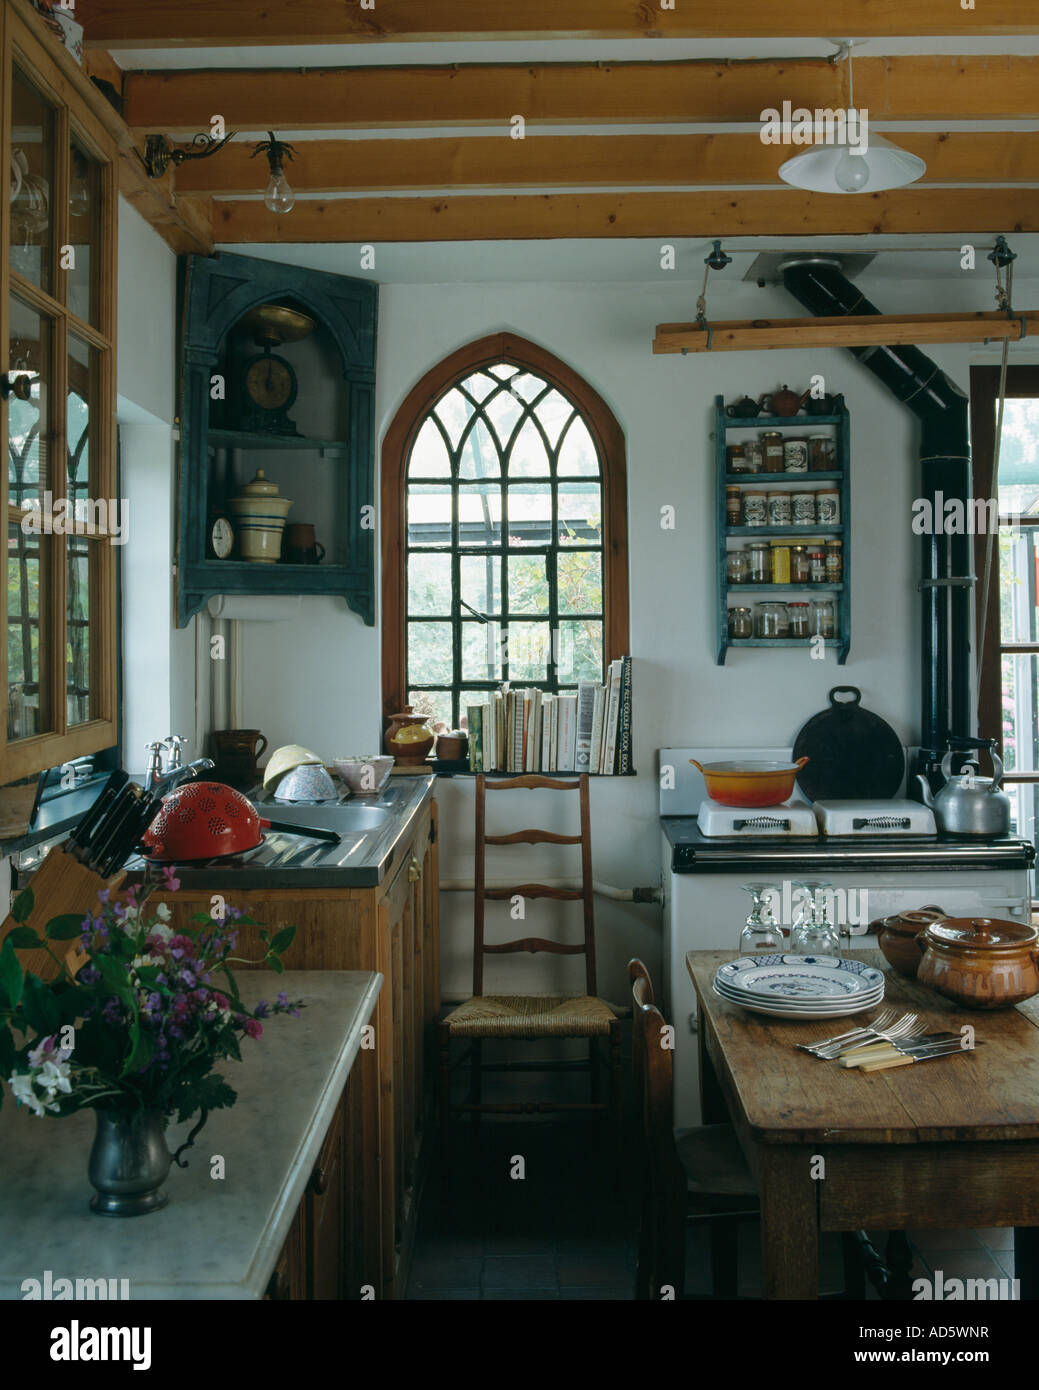 https://c8.alamy.com/comp/AD5WNR/antique-corner-cupboard-beside-arched-gothic-window-in-country-kitchen-AD5WNR.jpg